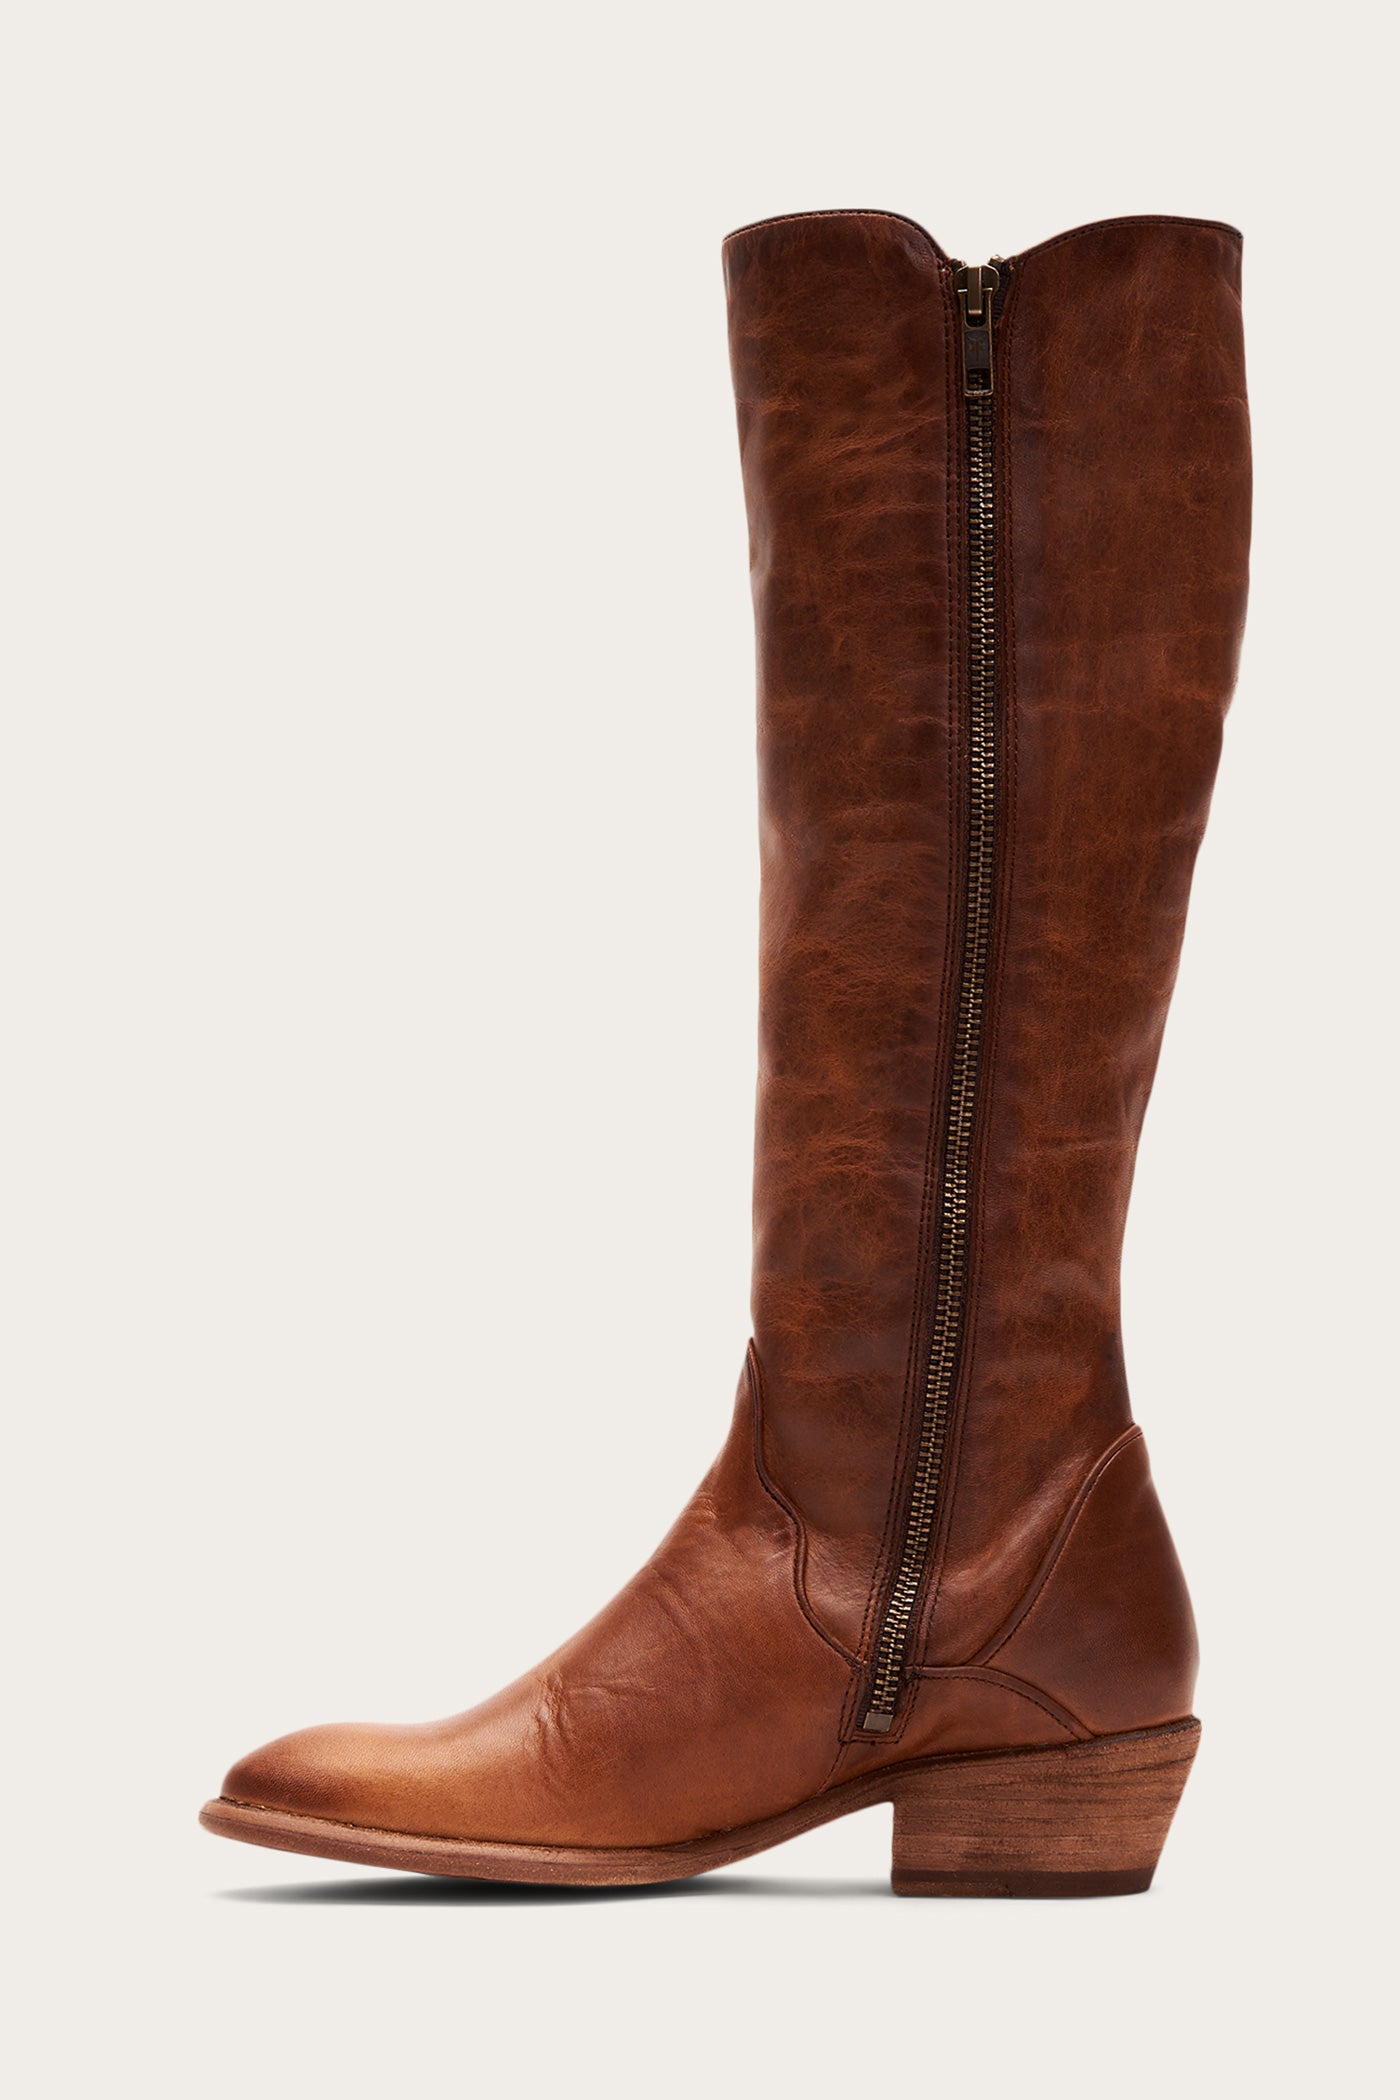 frye carson piping boot